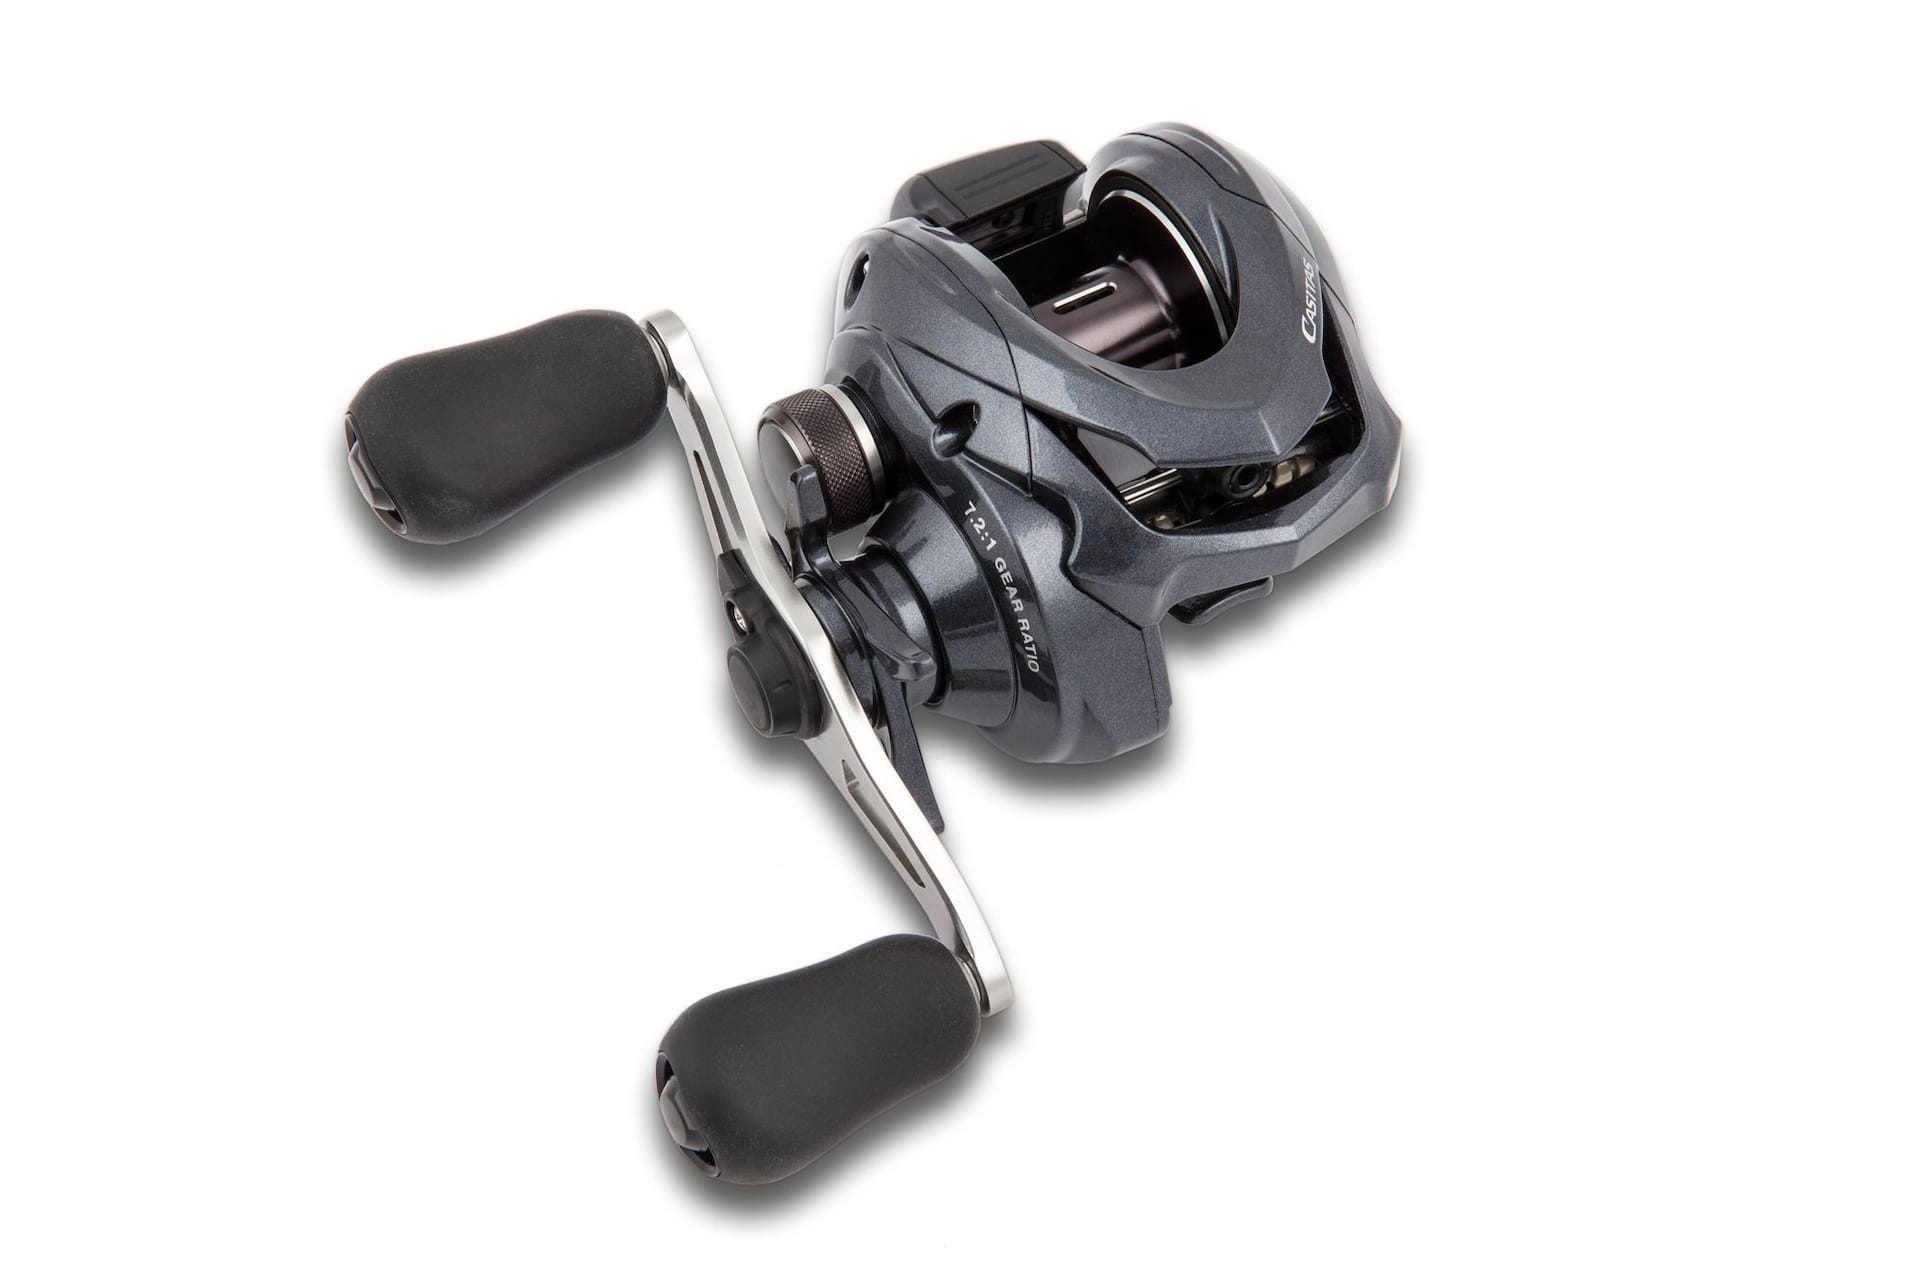 Shimano Corvalus Level Wind Baitcast Fishing Reel, Right and Left Hand,  Assorted